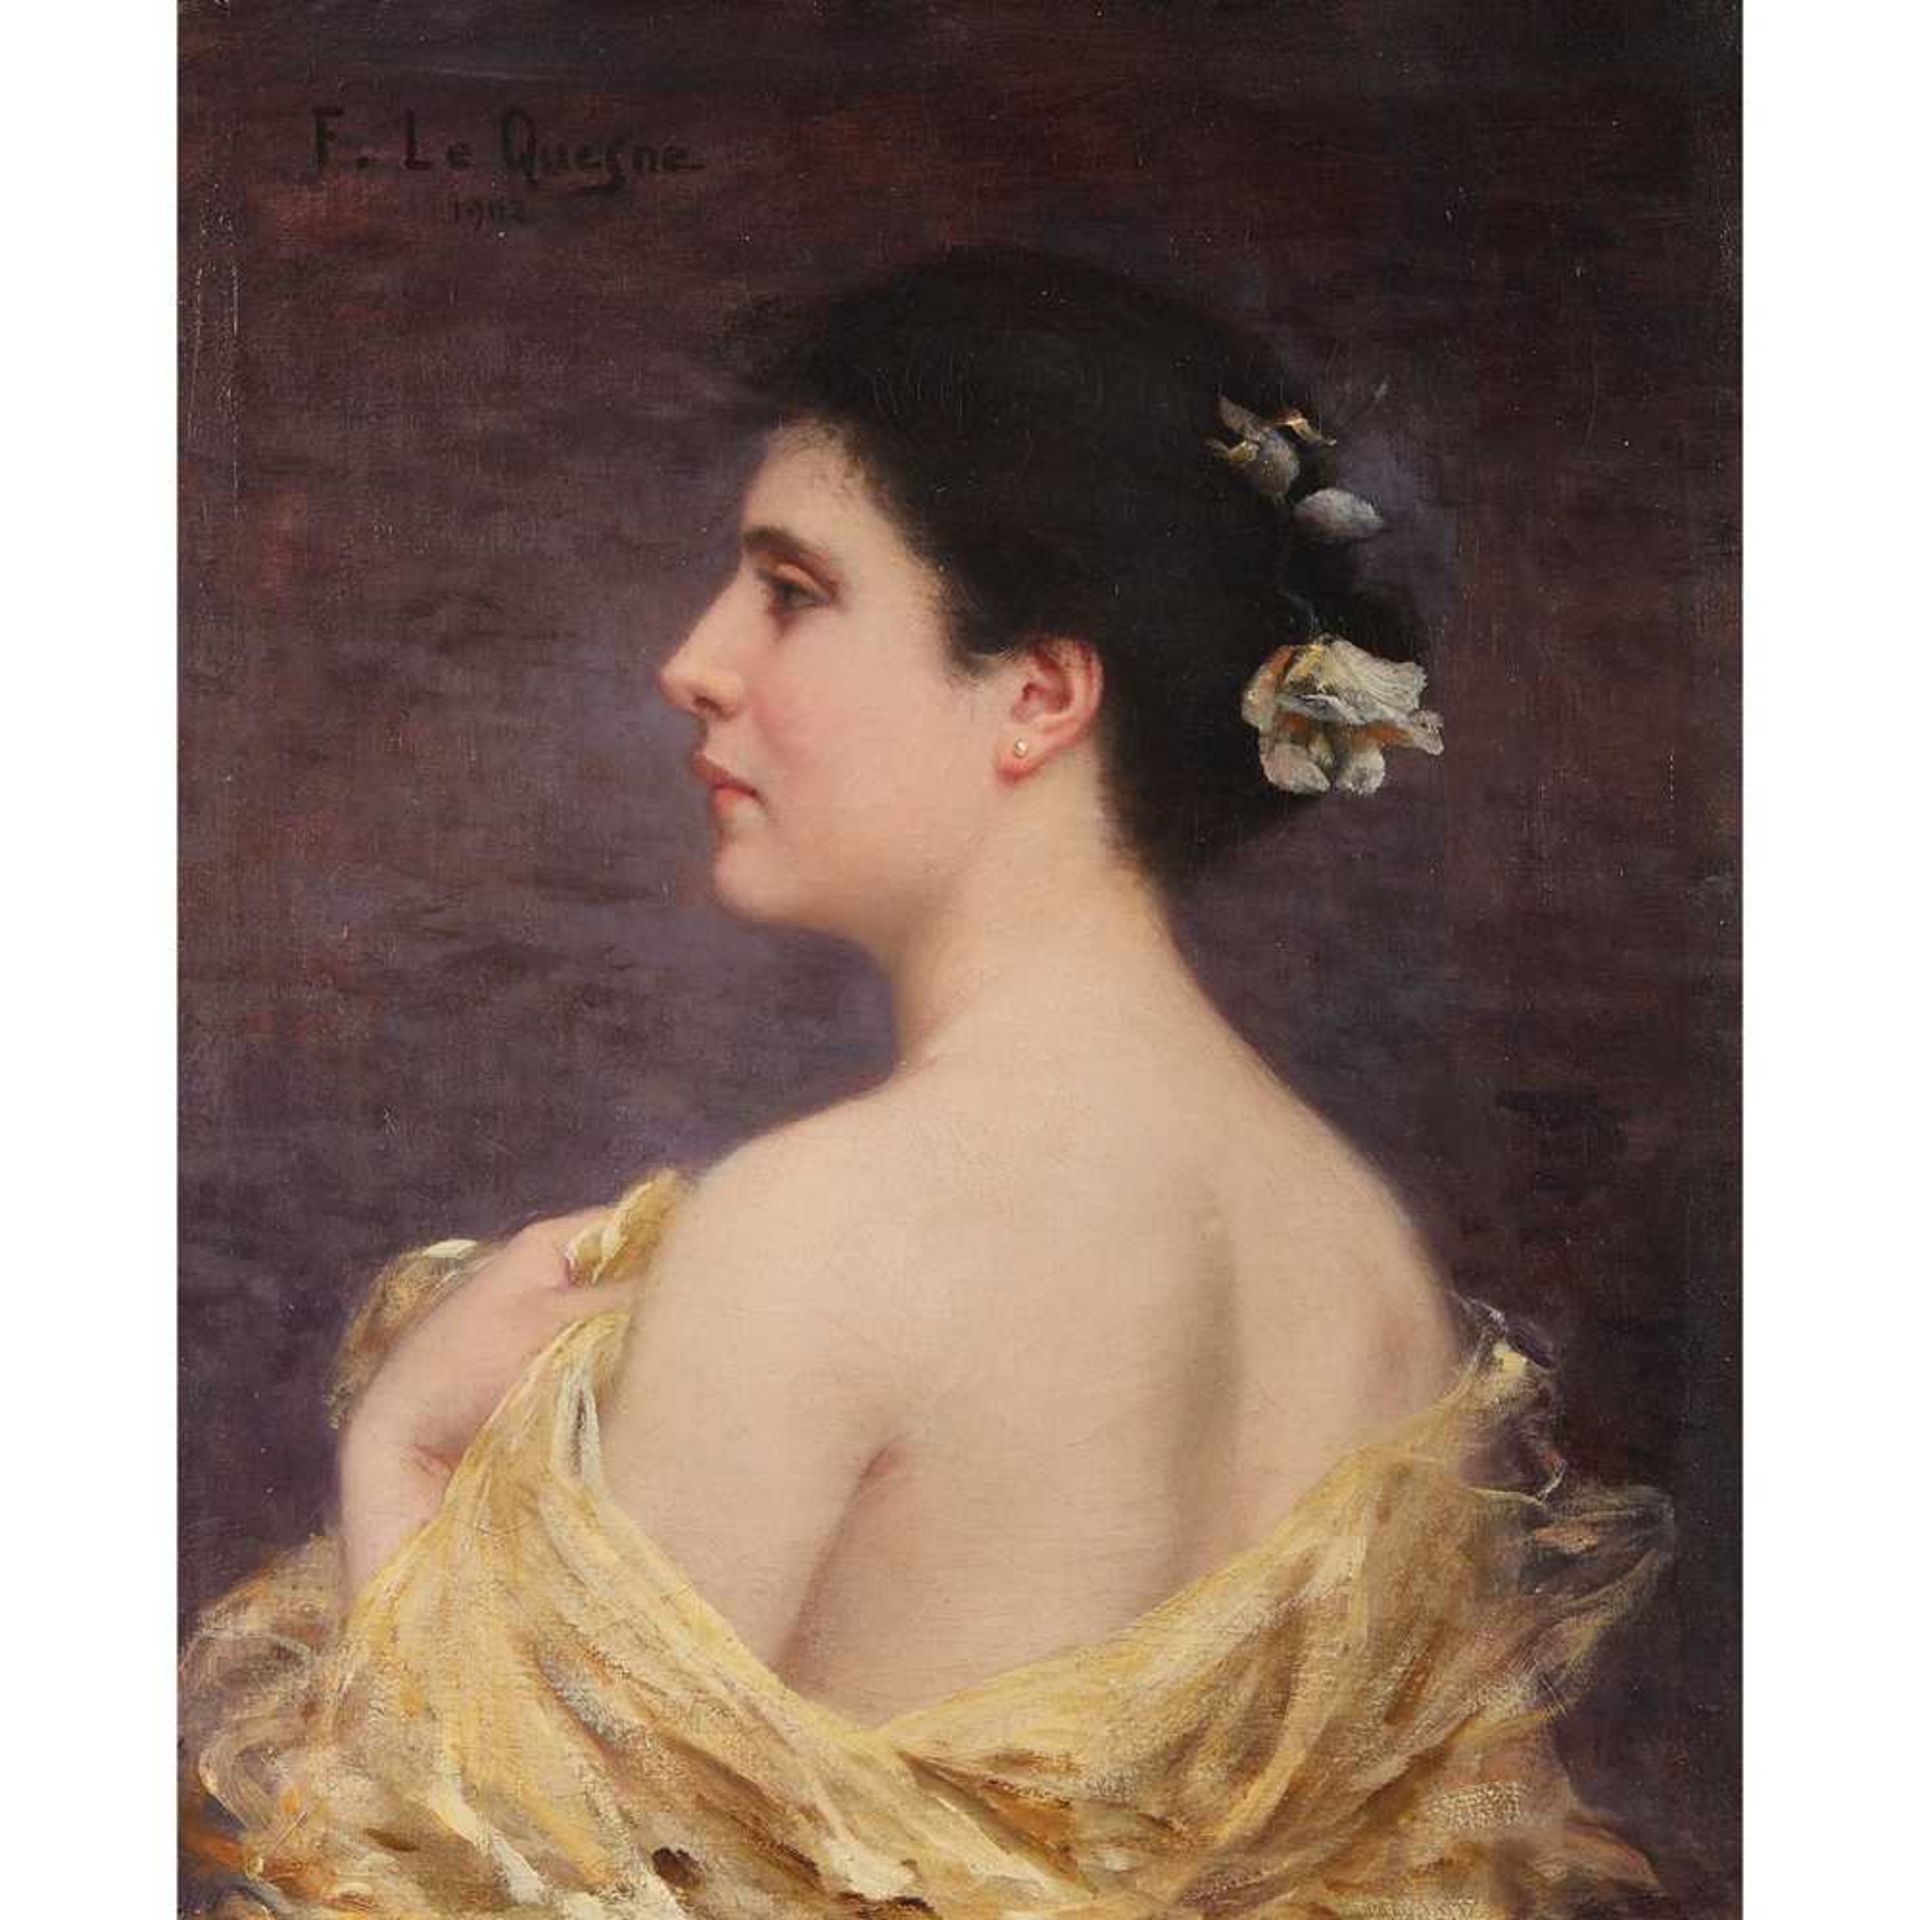 FERNAND LE QUESNE (FRENCH 1856-1918) STUDY OF A YOUNG BEAUTY IN PROFILE